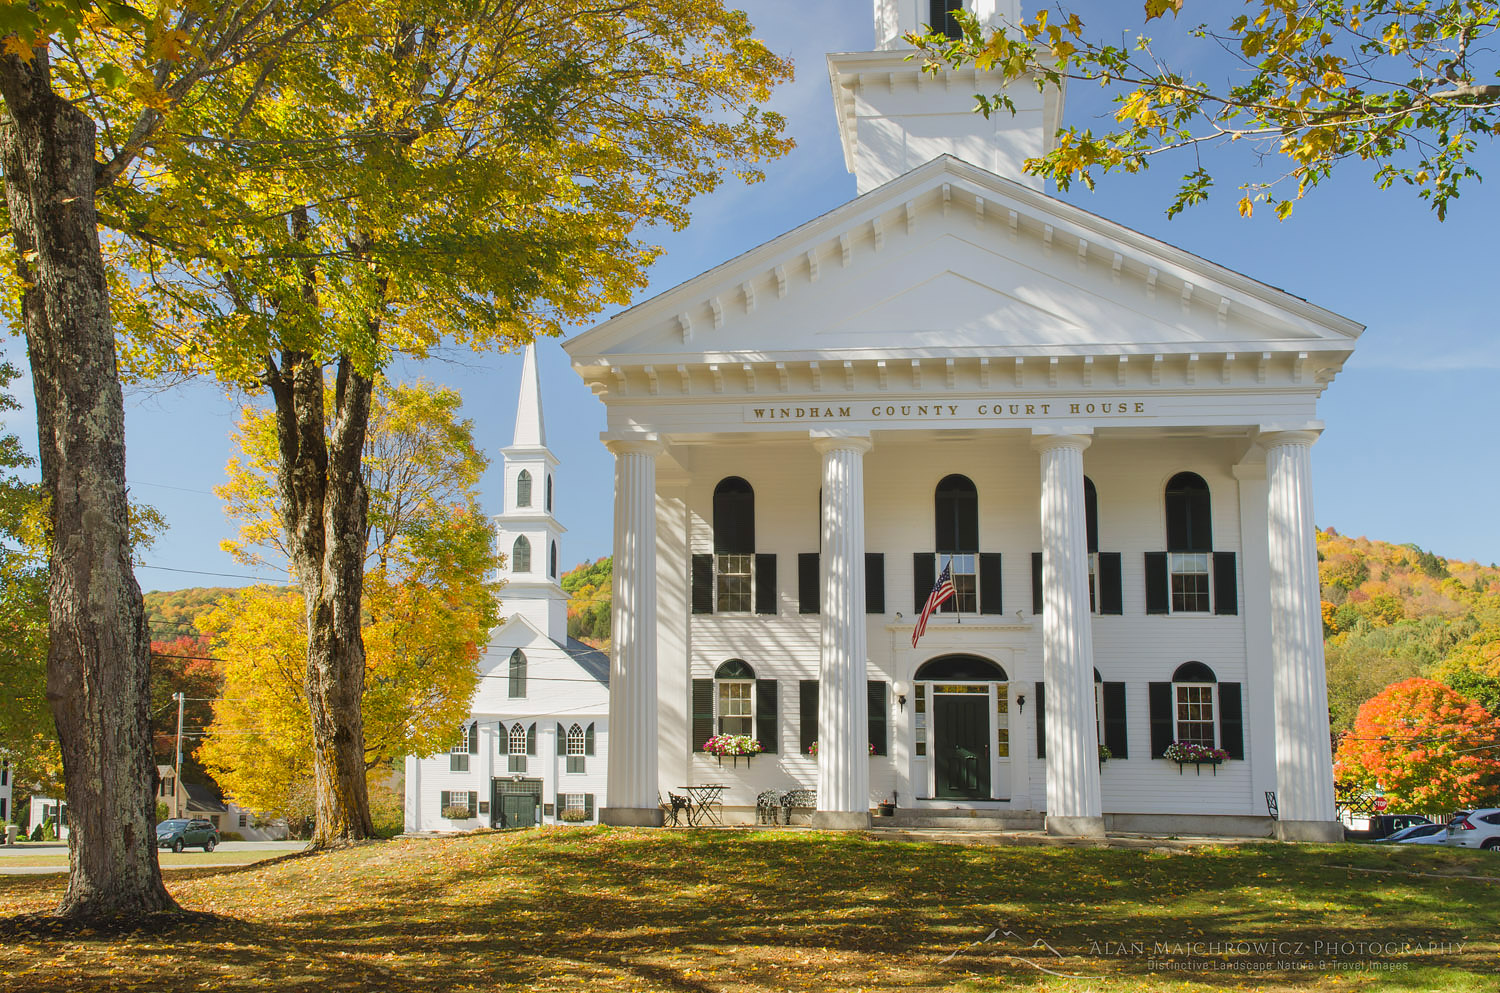 Windham County courthouse and church framed in golden fall foliage, Newfane, Vermont #59468